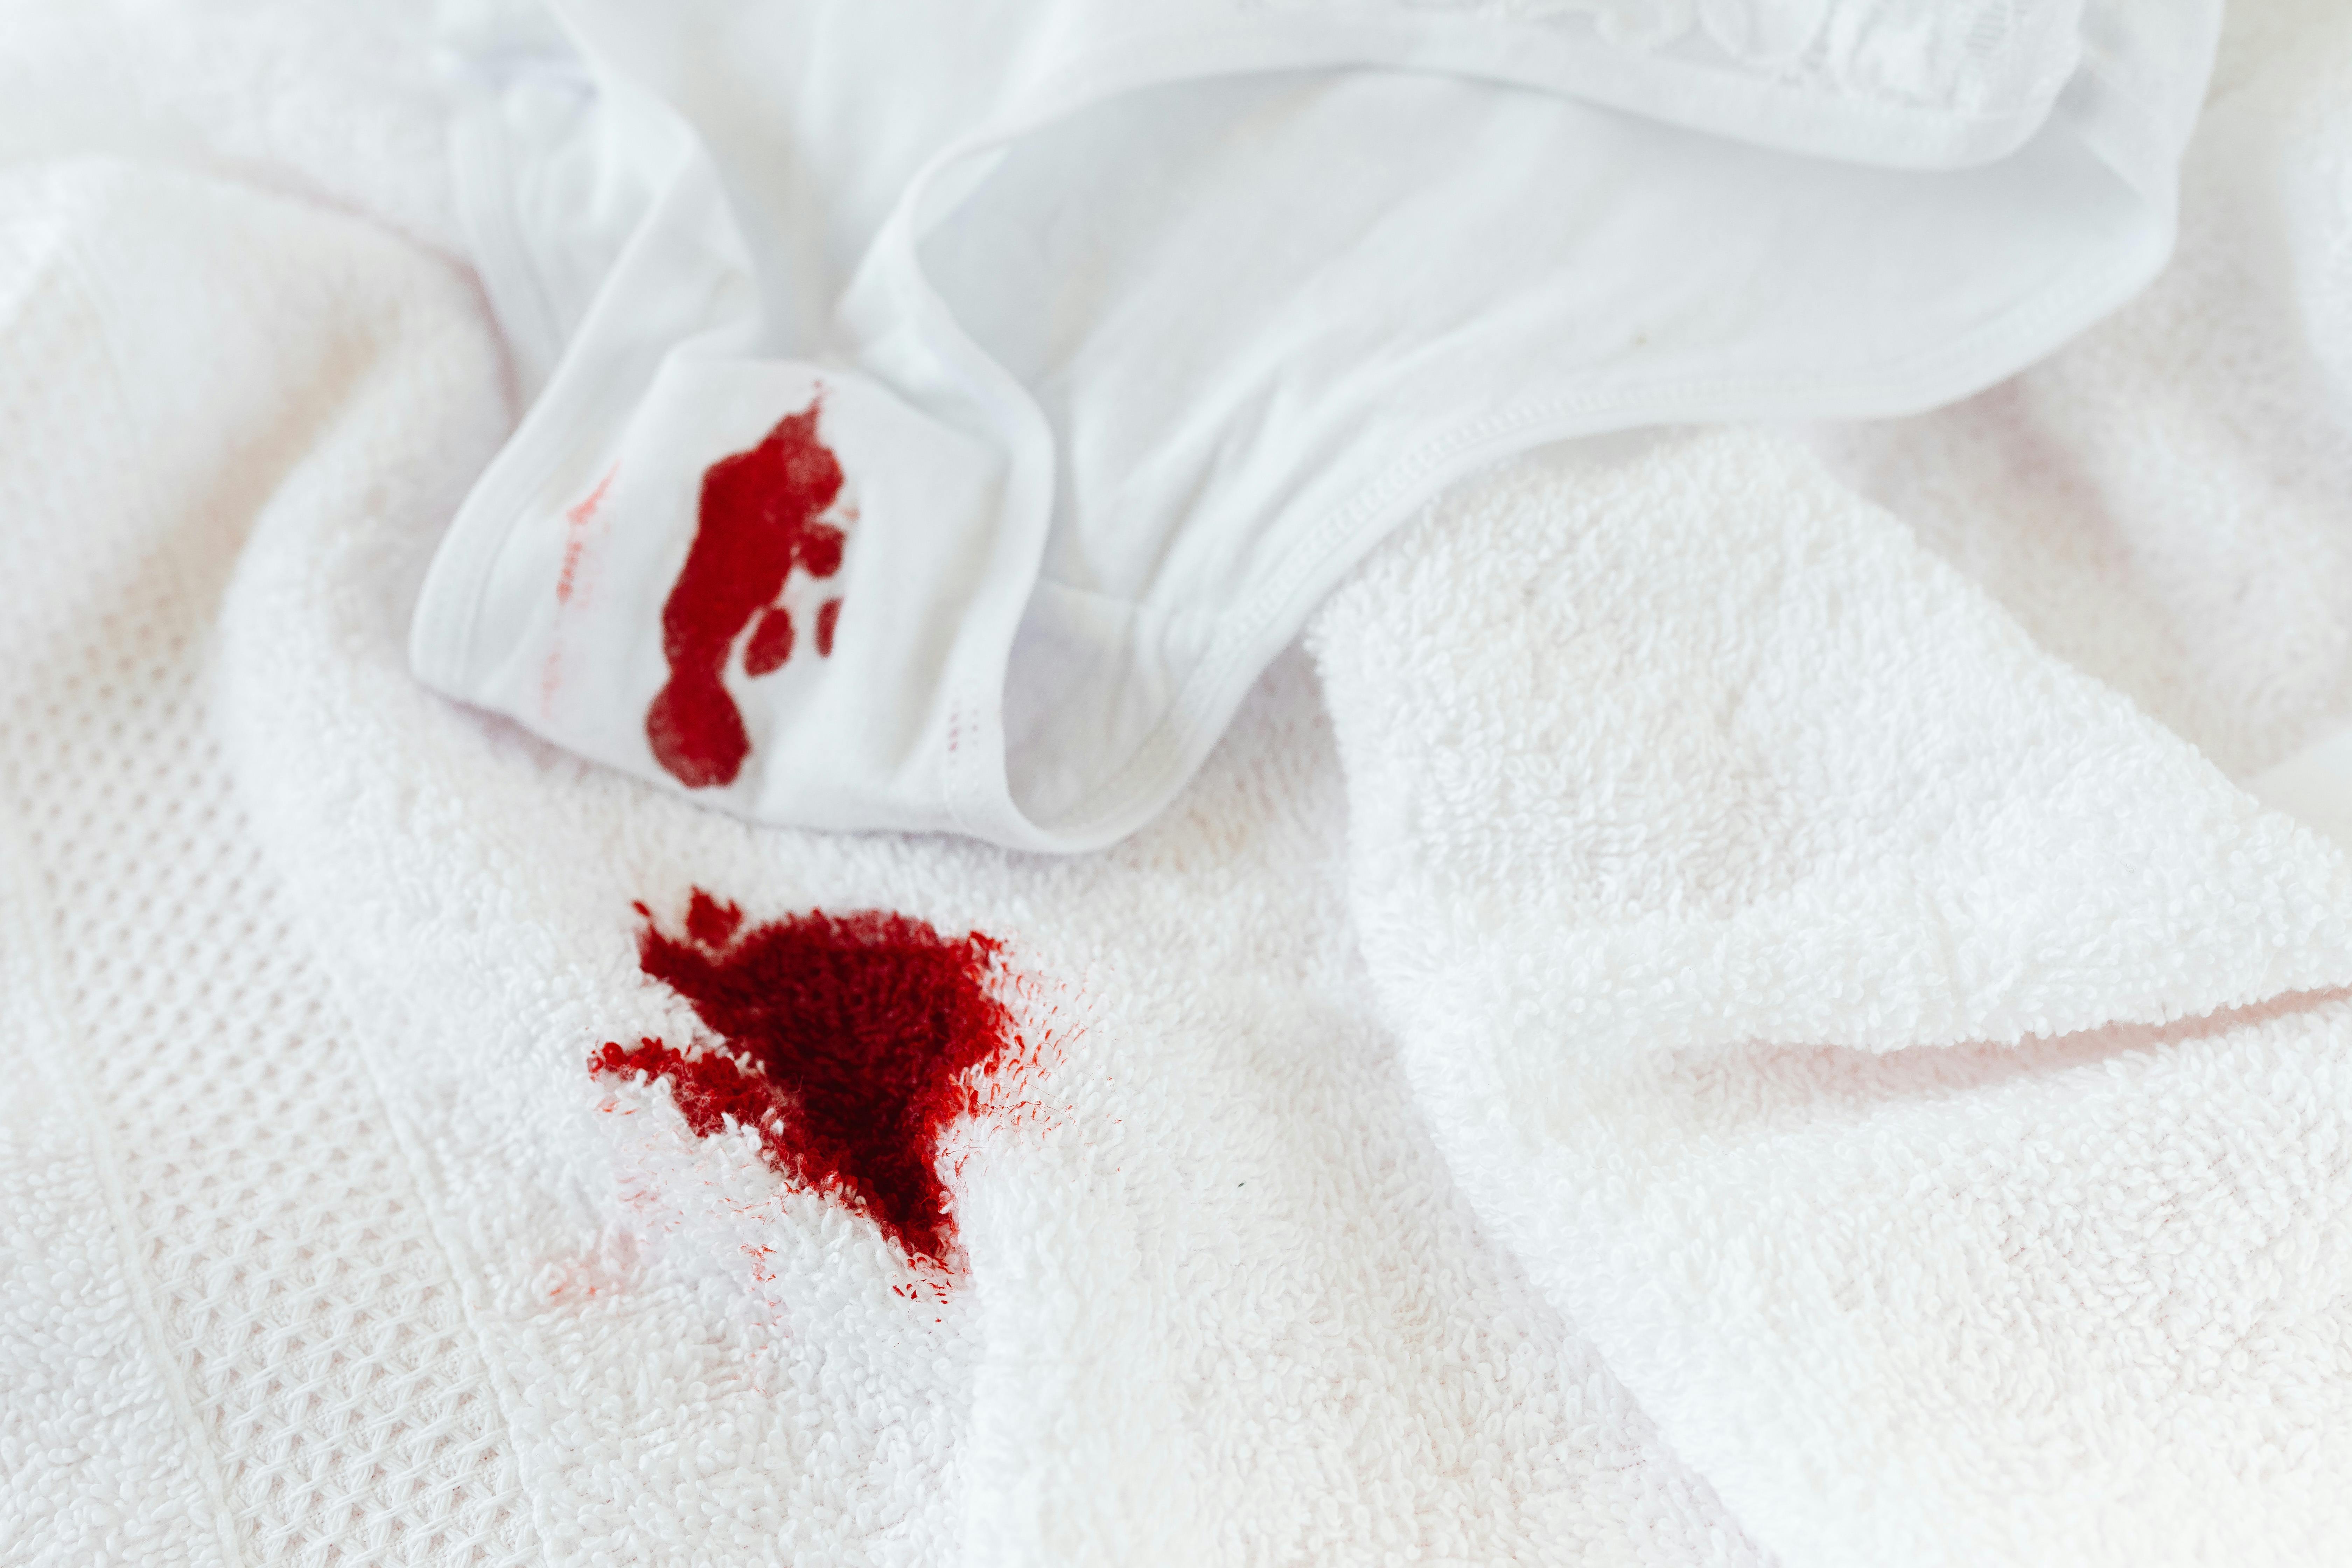 A Menstrual Stain on a Pad and Towel · Free Stock Photo